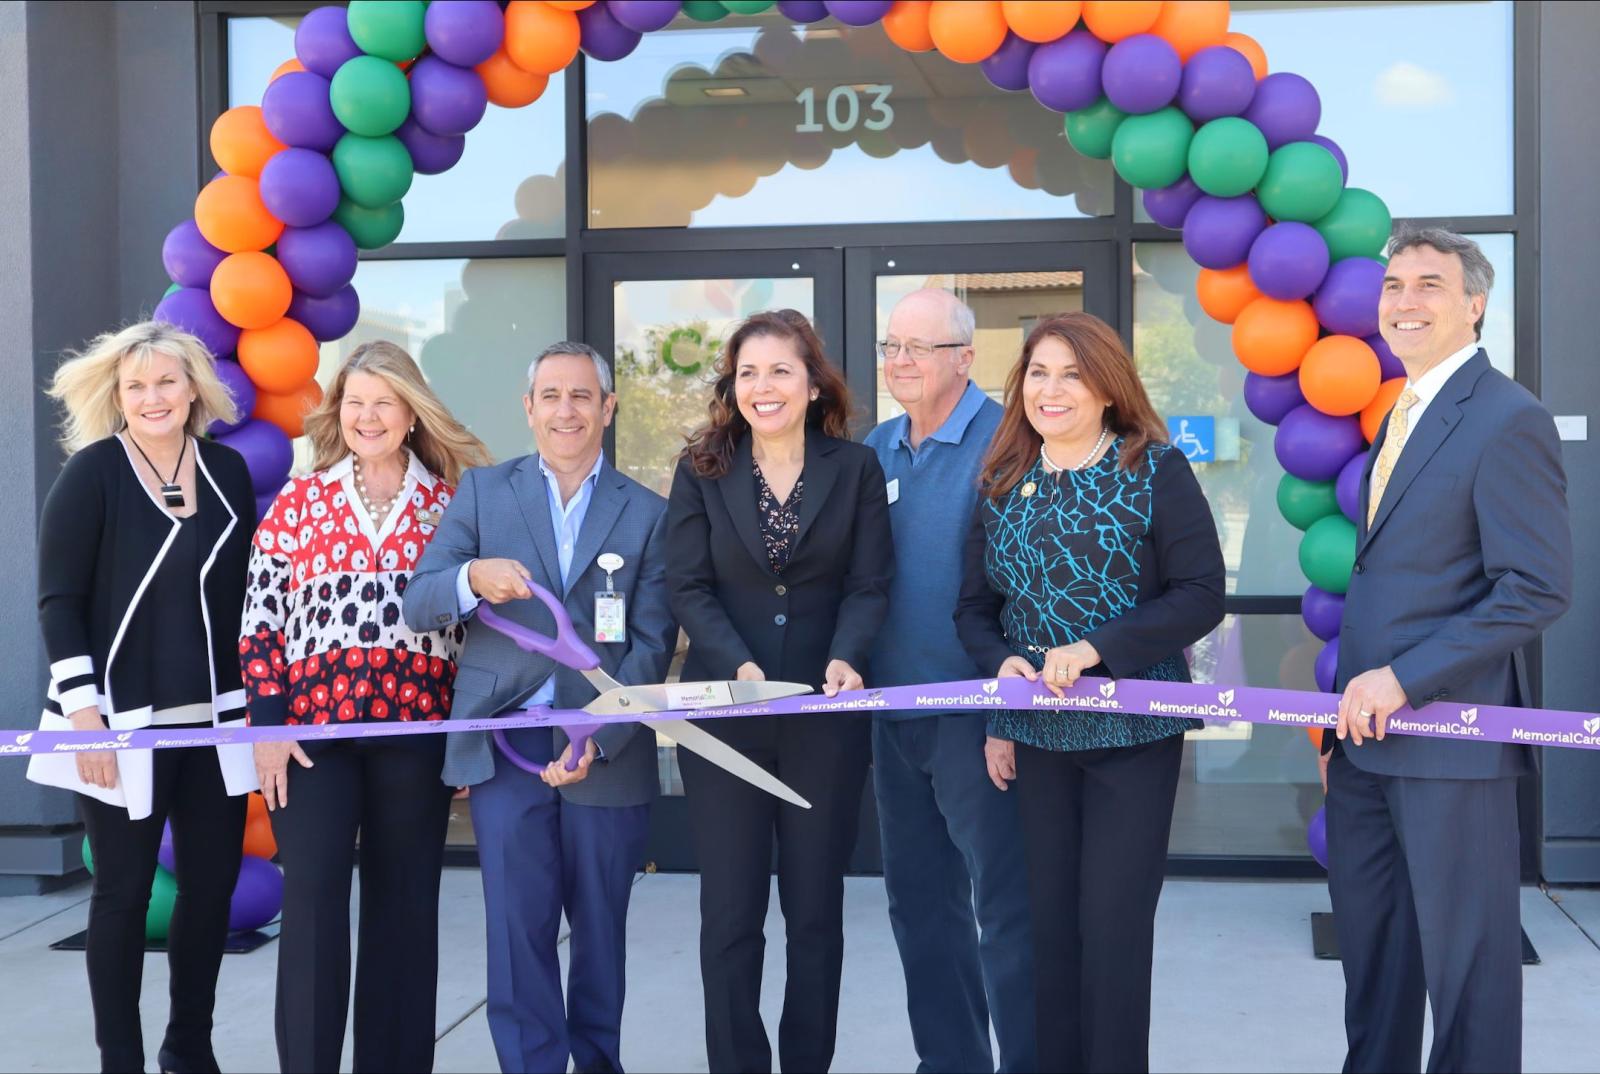 MemorialCare executives and Cypress officials cut the ribbon to open the new MemorialCare Medical Group Cypress location.